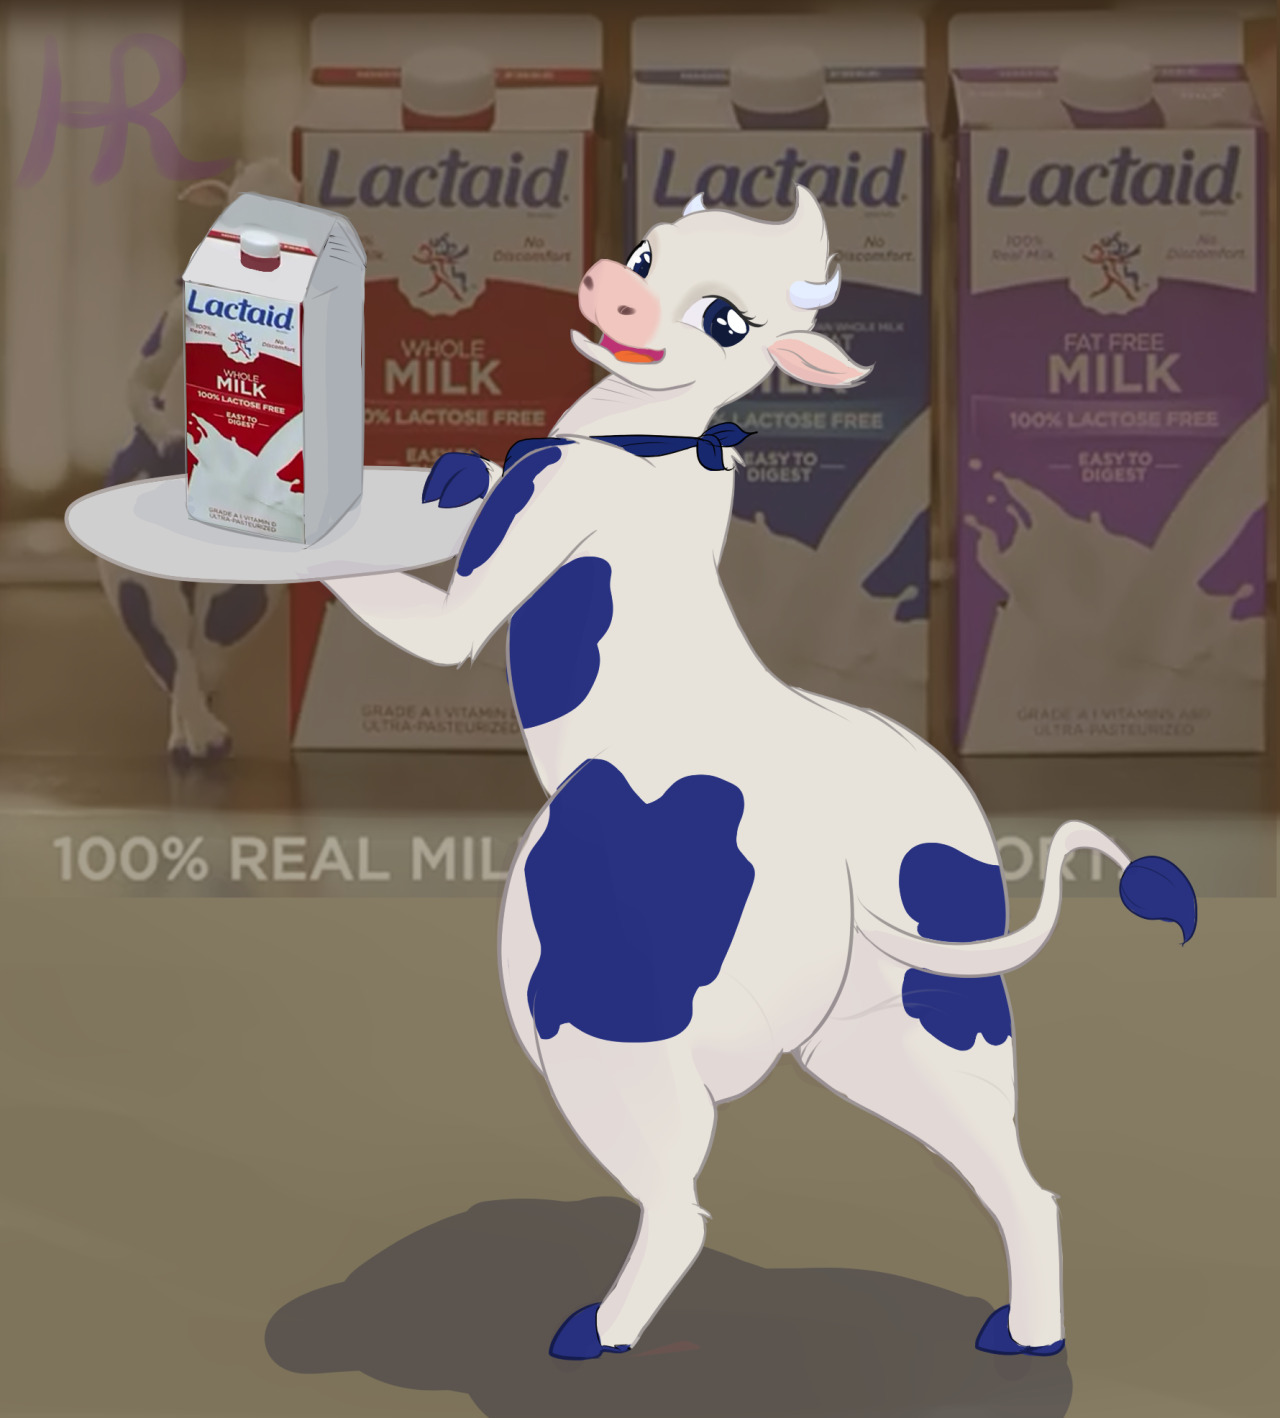 https://www.youtube.com/watch?v=qvW-lAFmZ7cI took a wack at the Cute cow mascot from